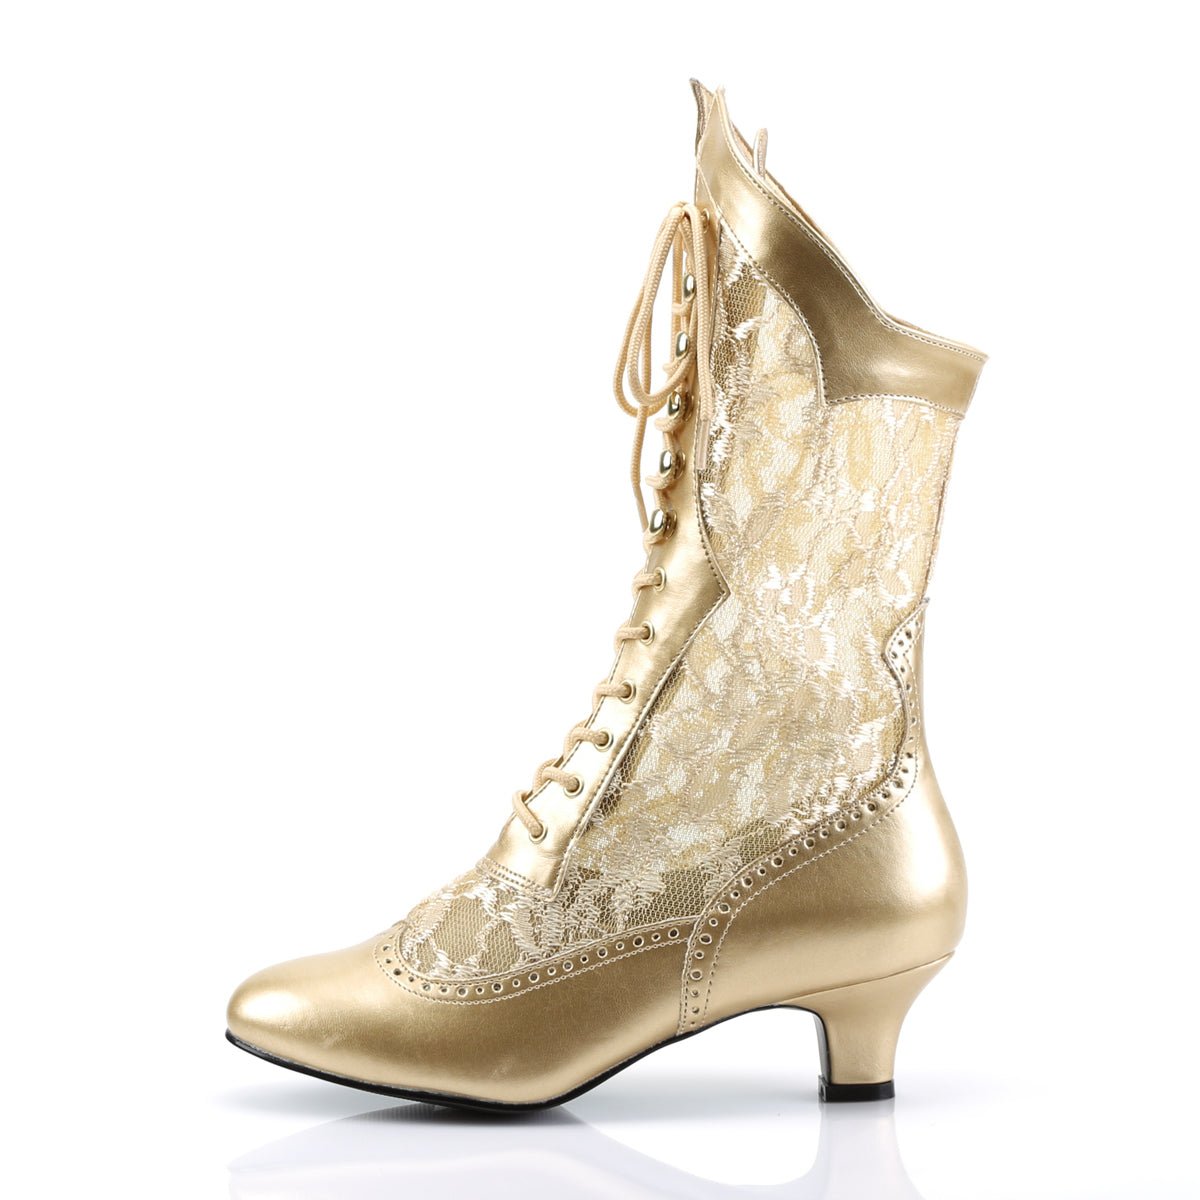 DAME-115 Black Ankle Boots Gold Multi view 4